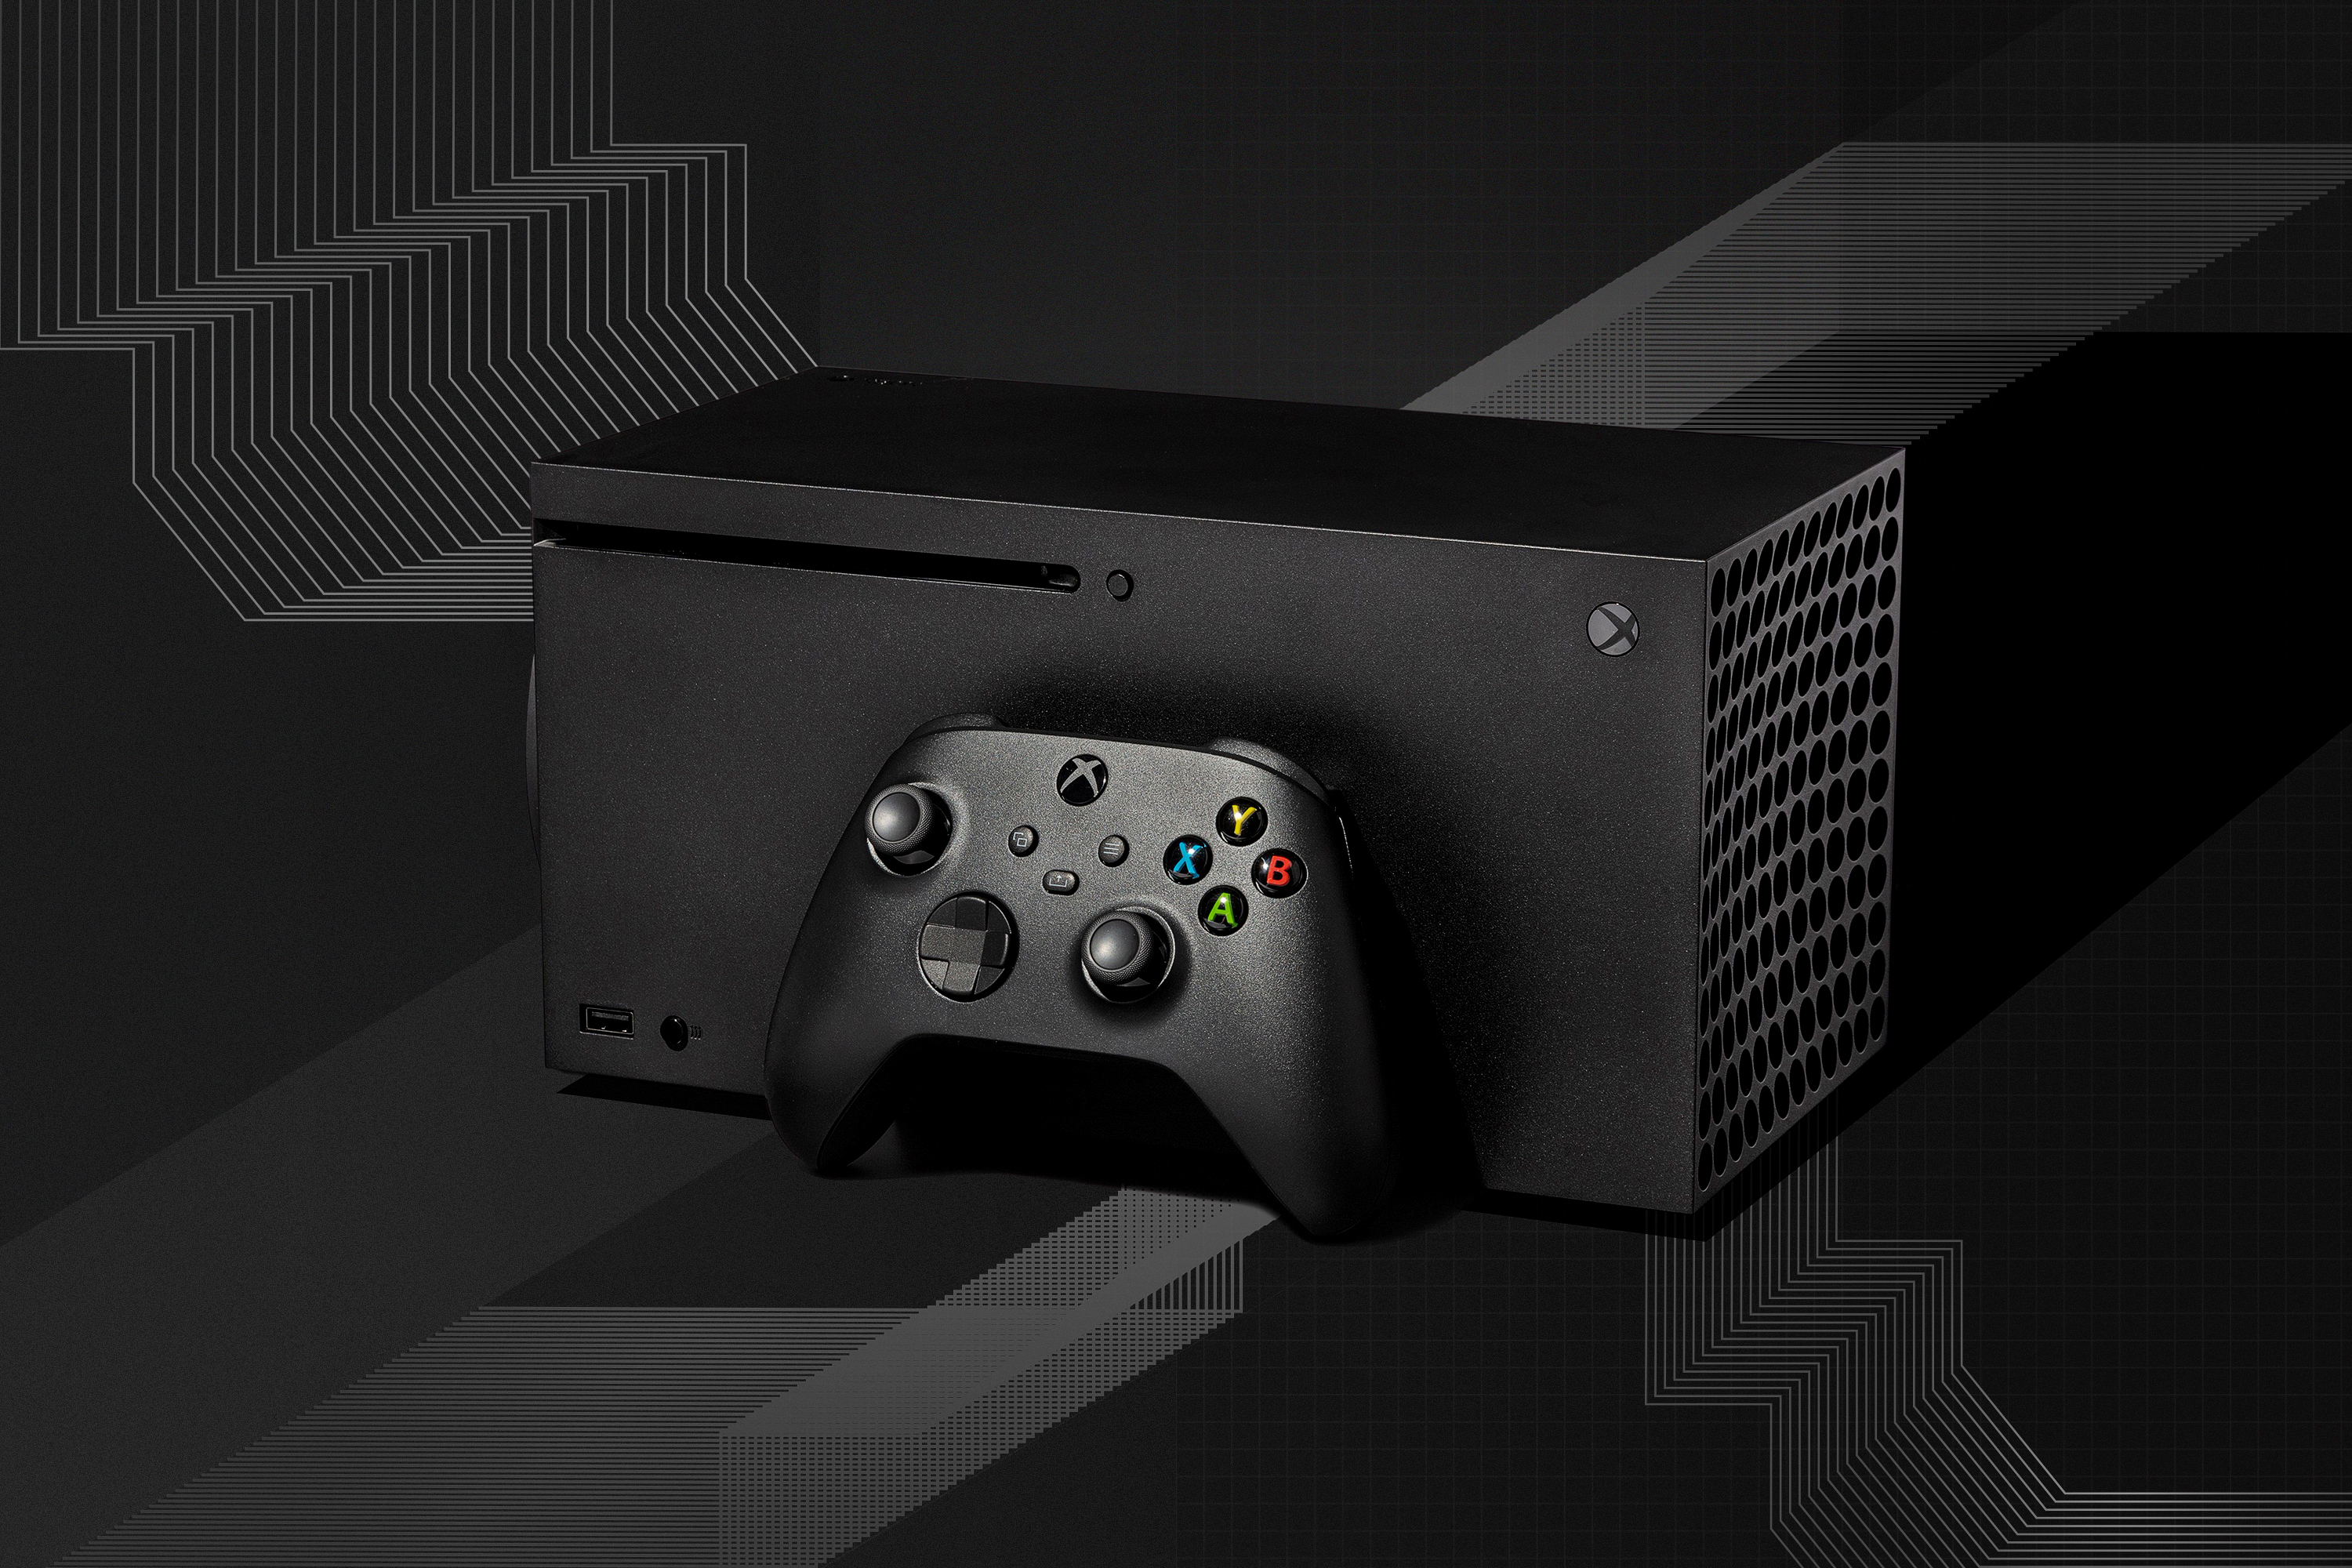 Xbox Series X console and controller on a graphic linear background